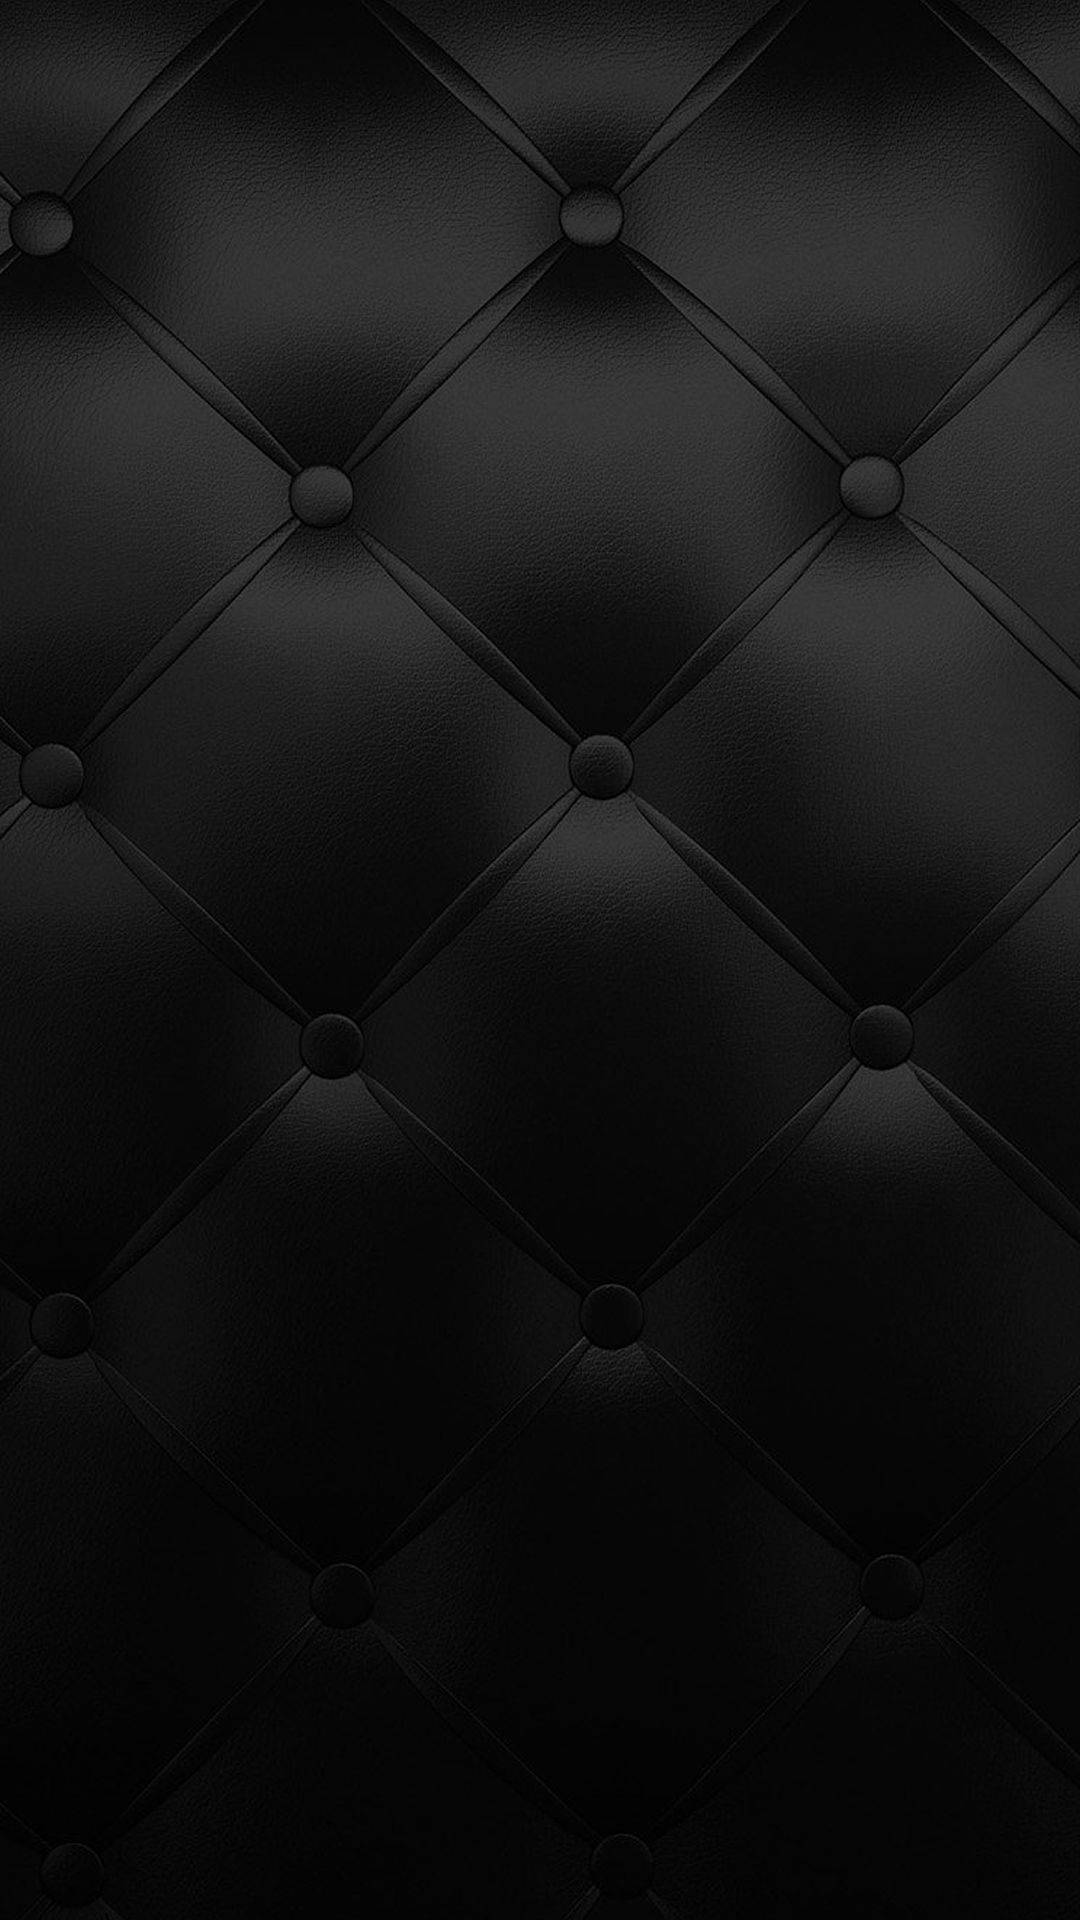 Cushioned Leather Solid Black Iphone Wallpaper